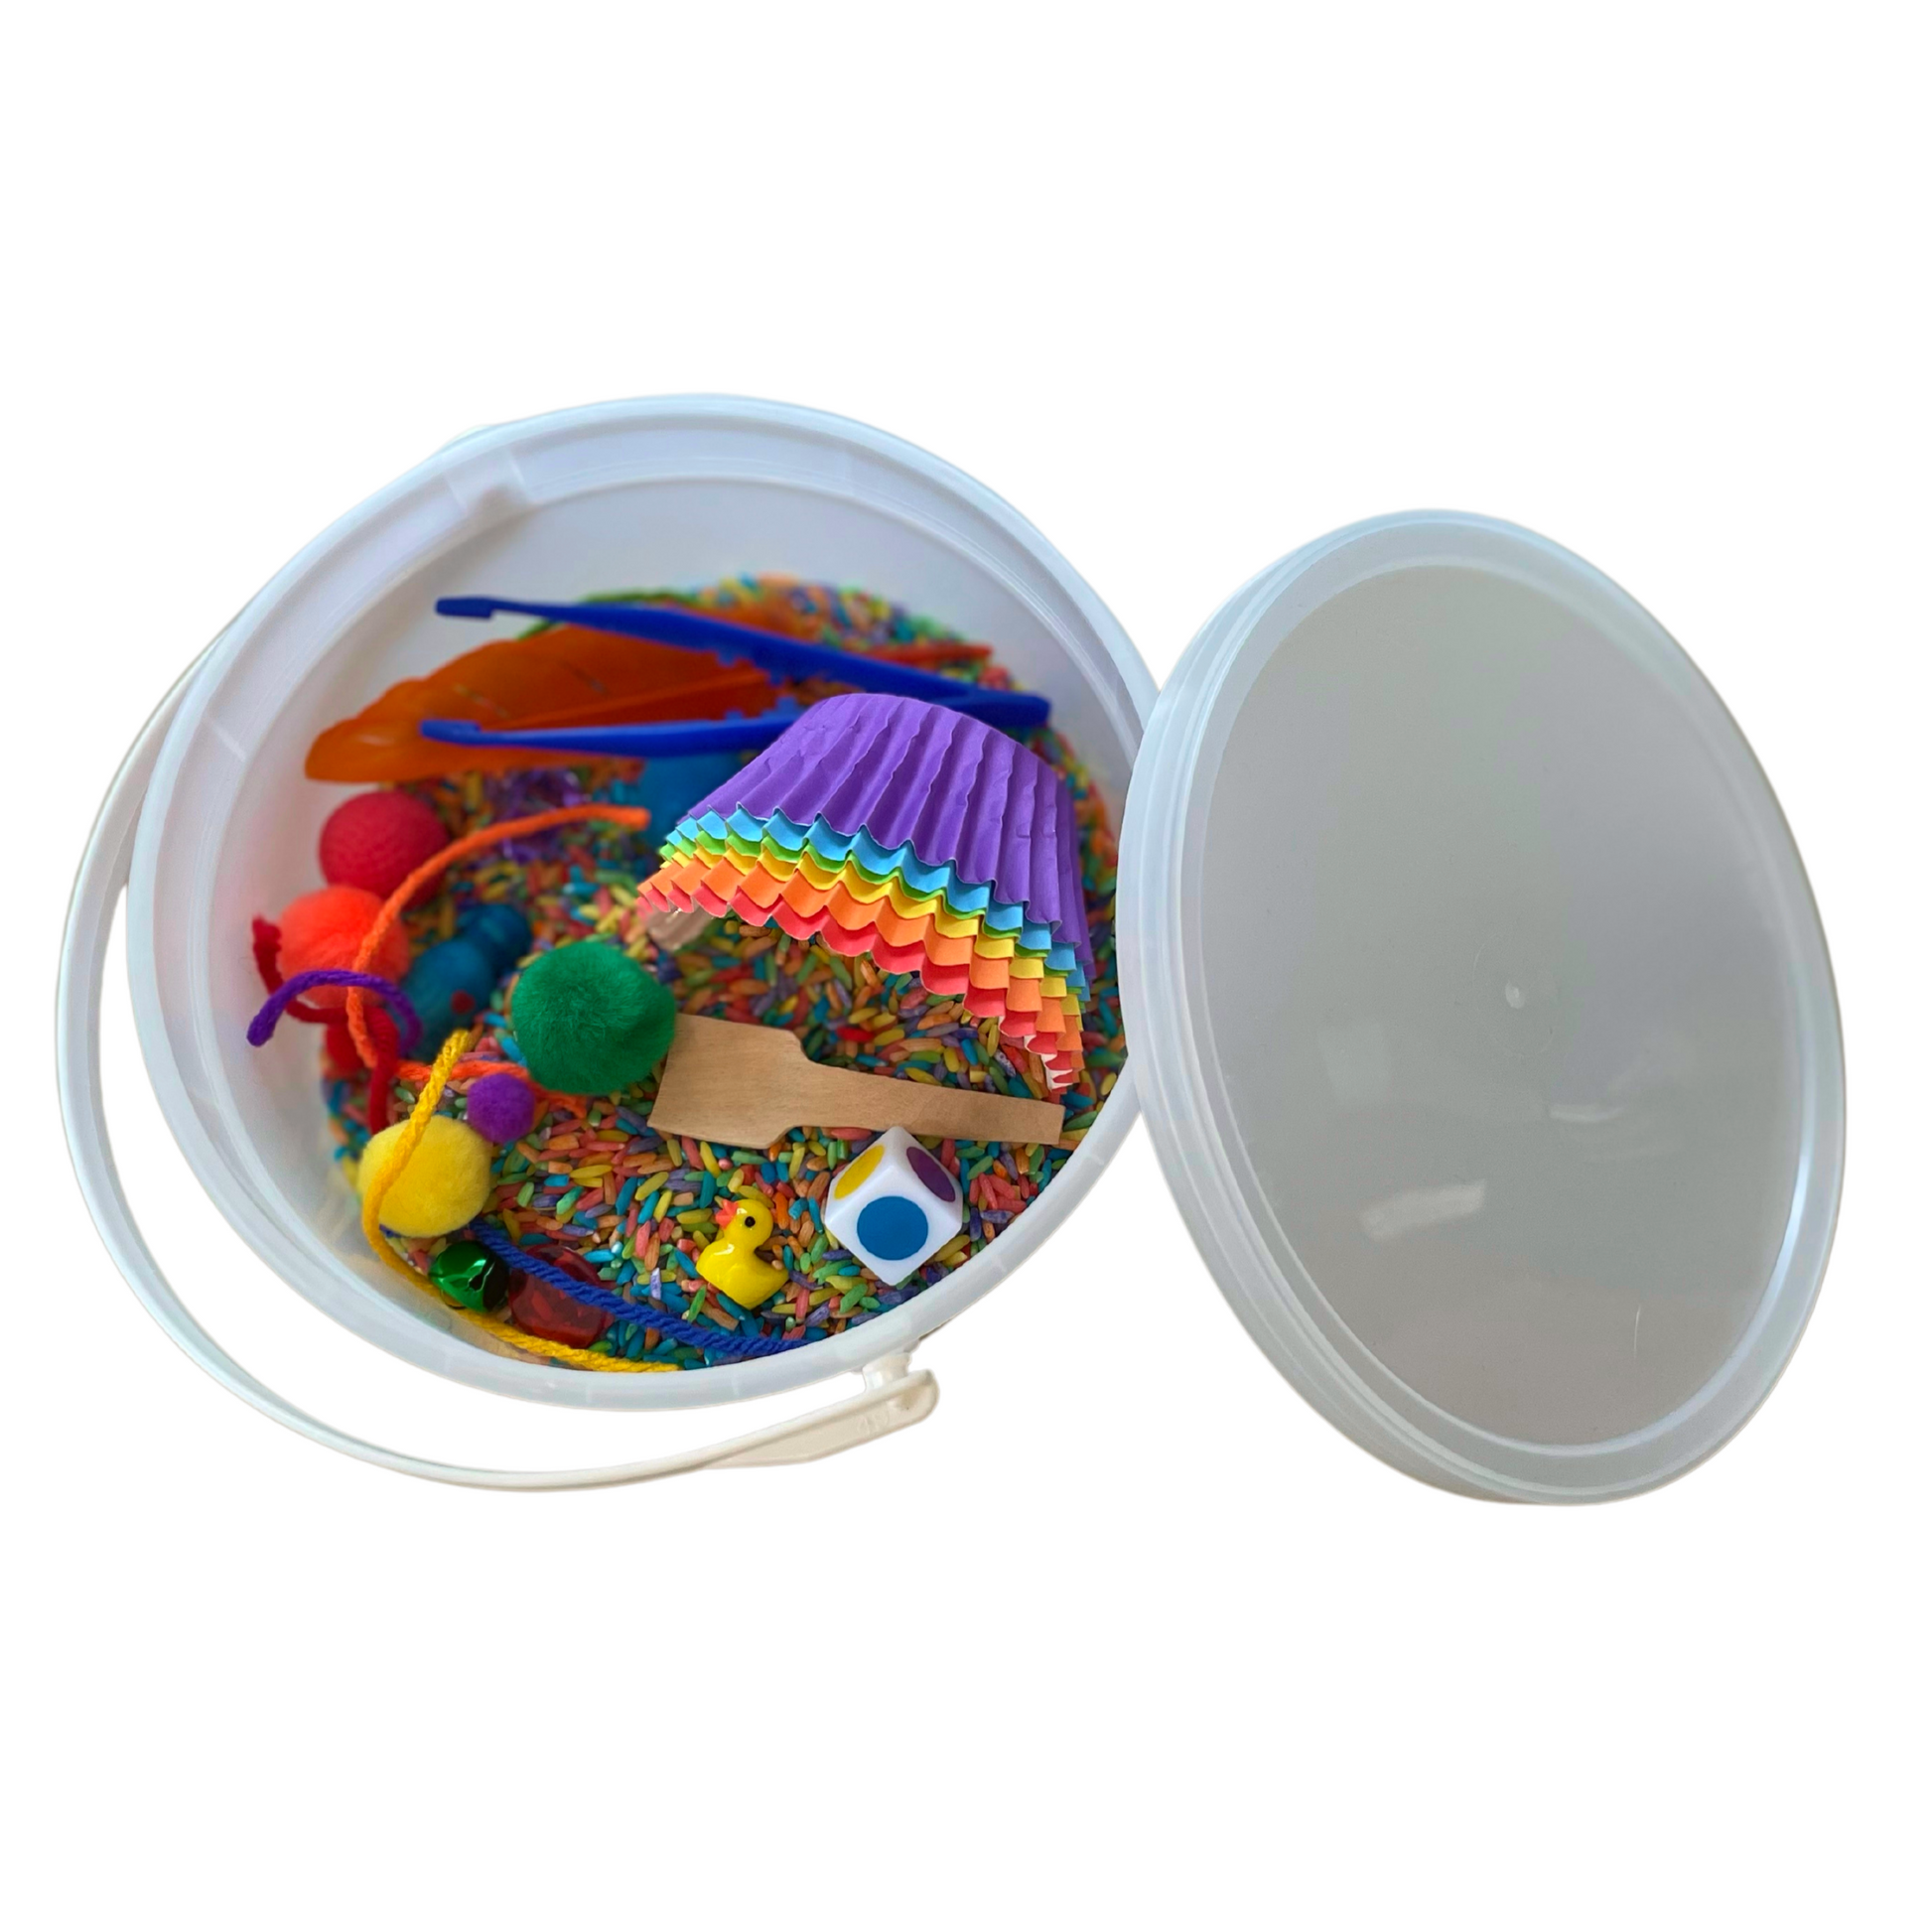 Colors Kit comes with dyed dry rice, colored baking cups, trinkets, tools, and accessories, as well as custom PlayMat and parent Sense of Help, all in our Play Pail.